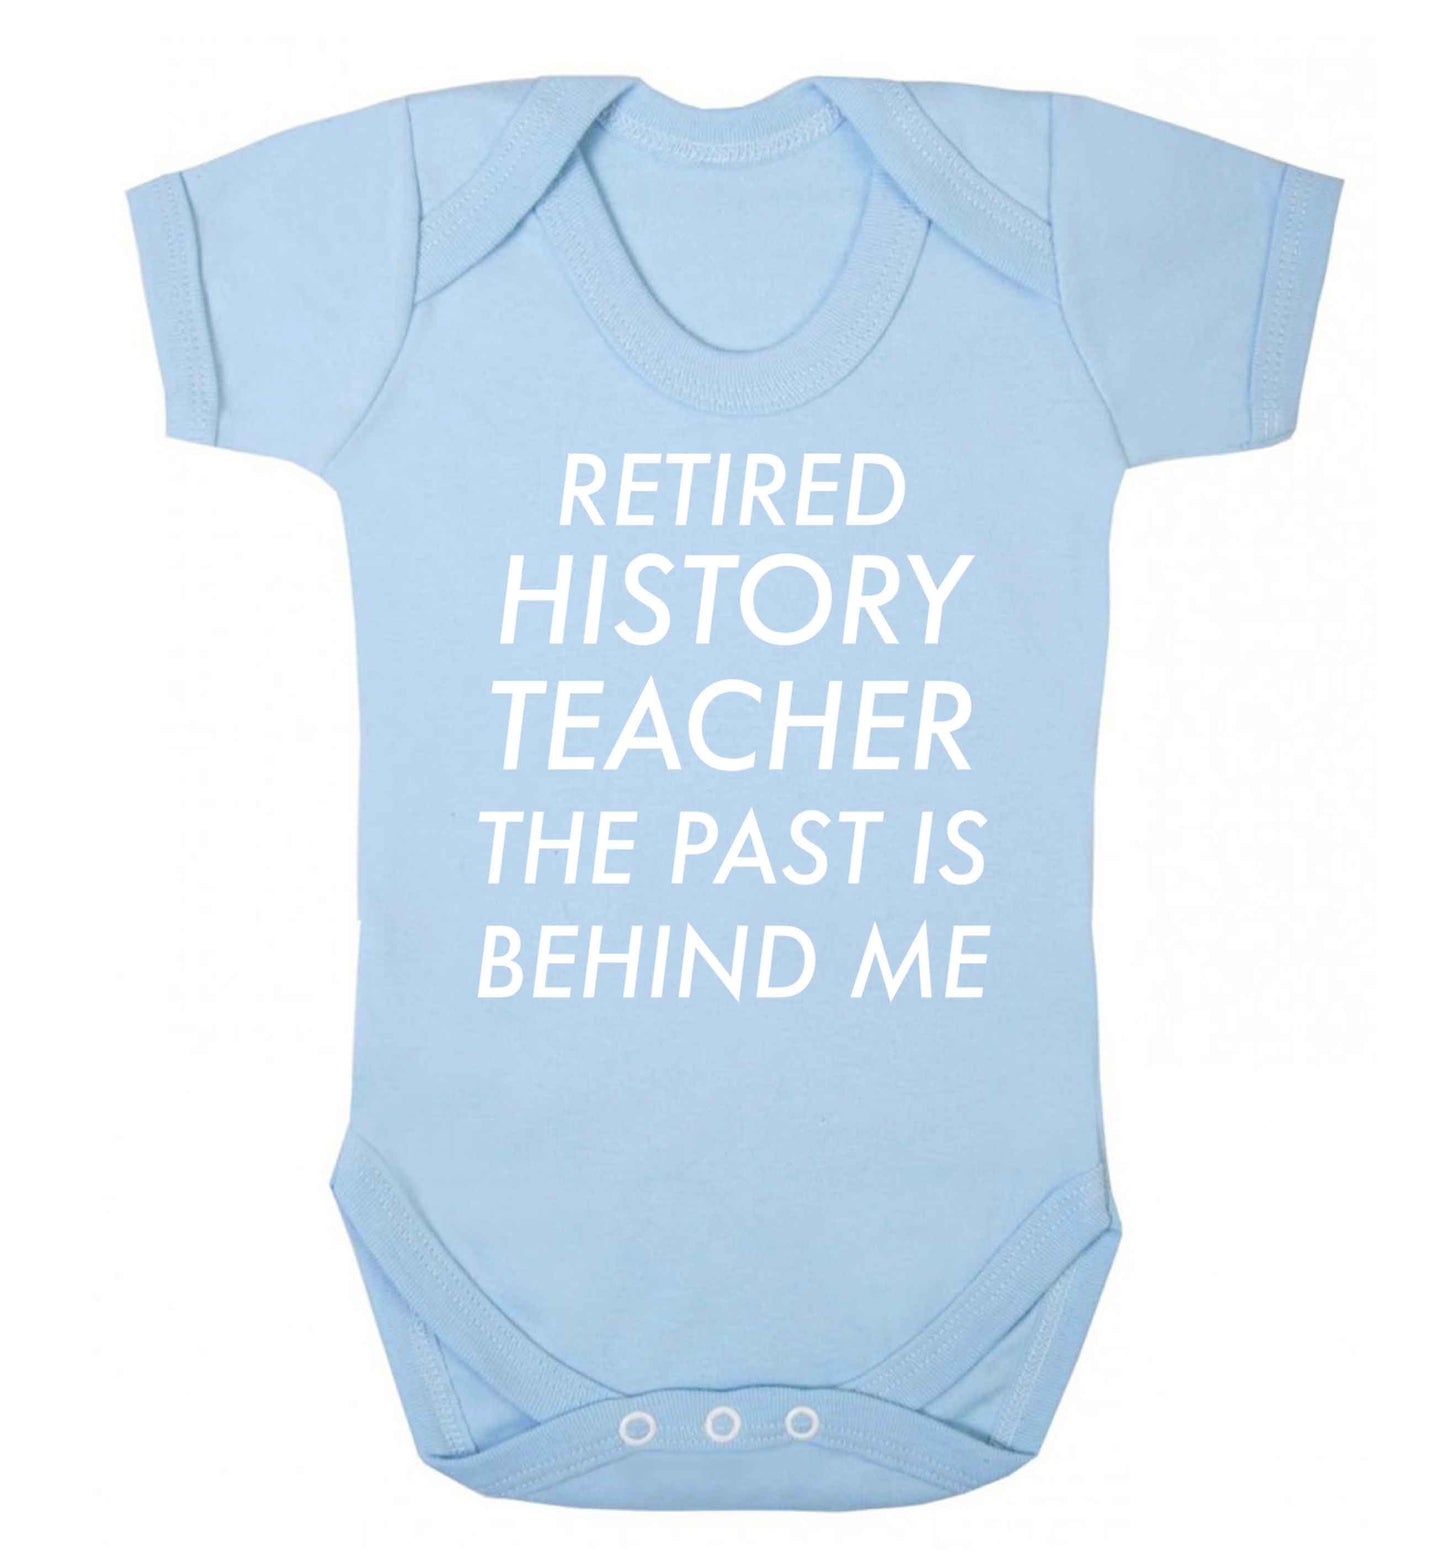 Retired history teacher the past is behind me Baby Vest pale blue 18-24 months